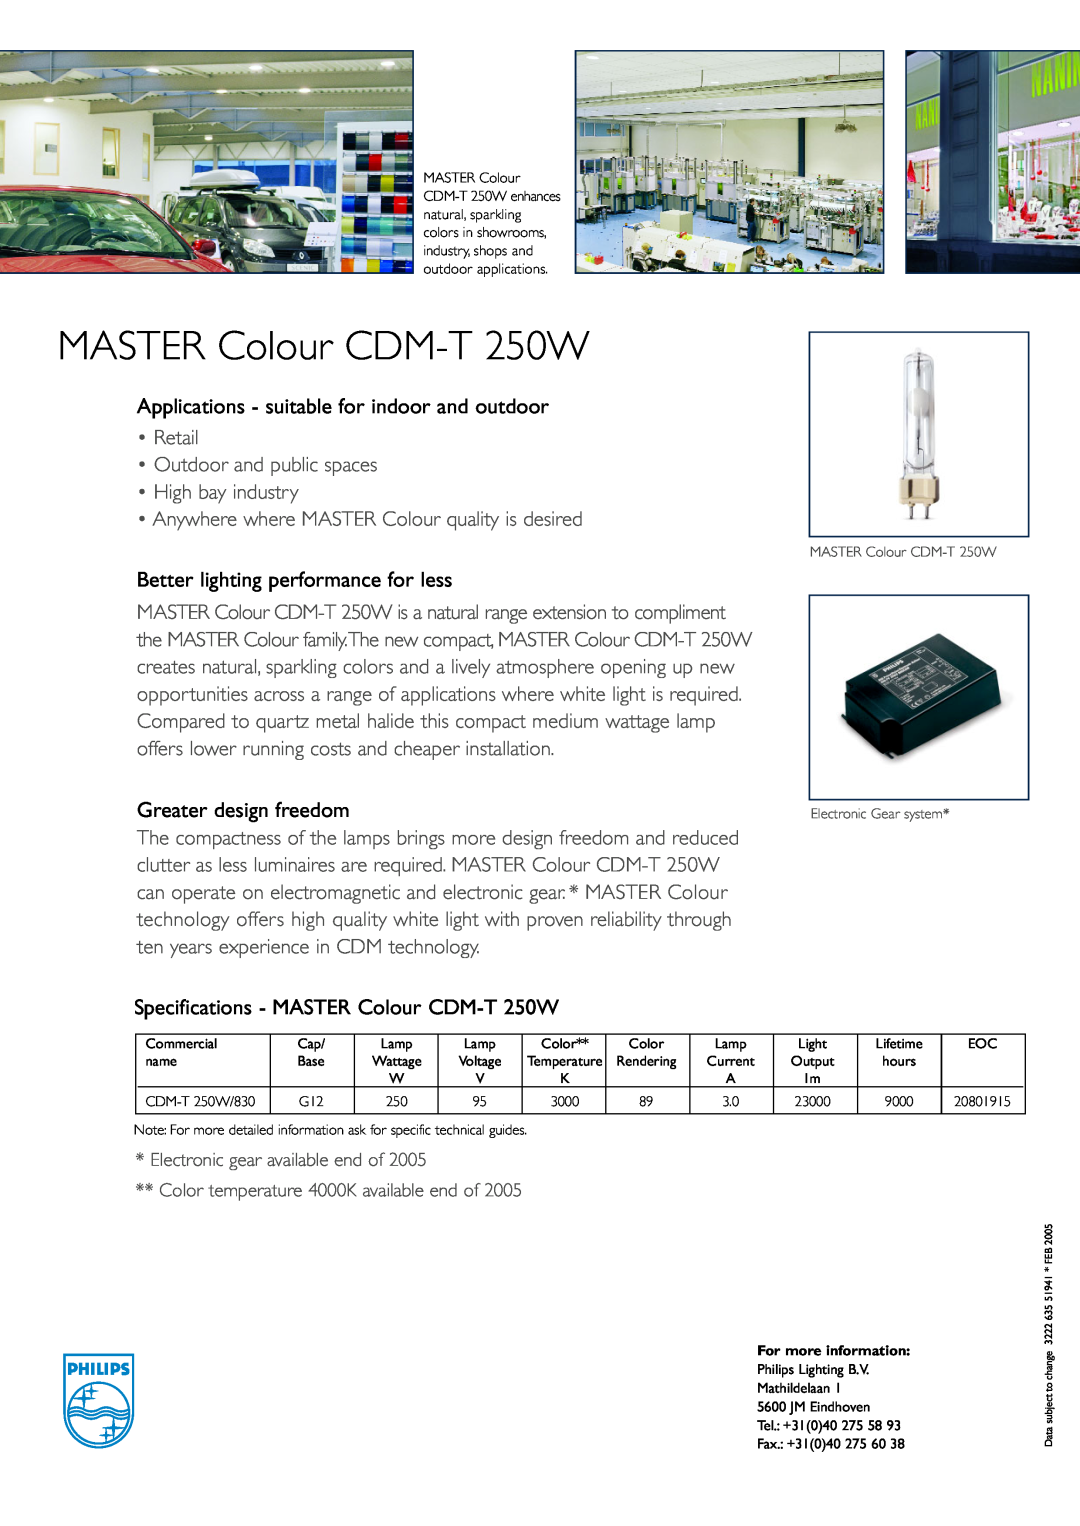 Philips CDM-T 250W manual MASTER Colour CDM-T250W, Applications - suitable for indoor and outdoor, Greater design freedom 